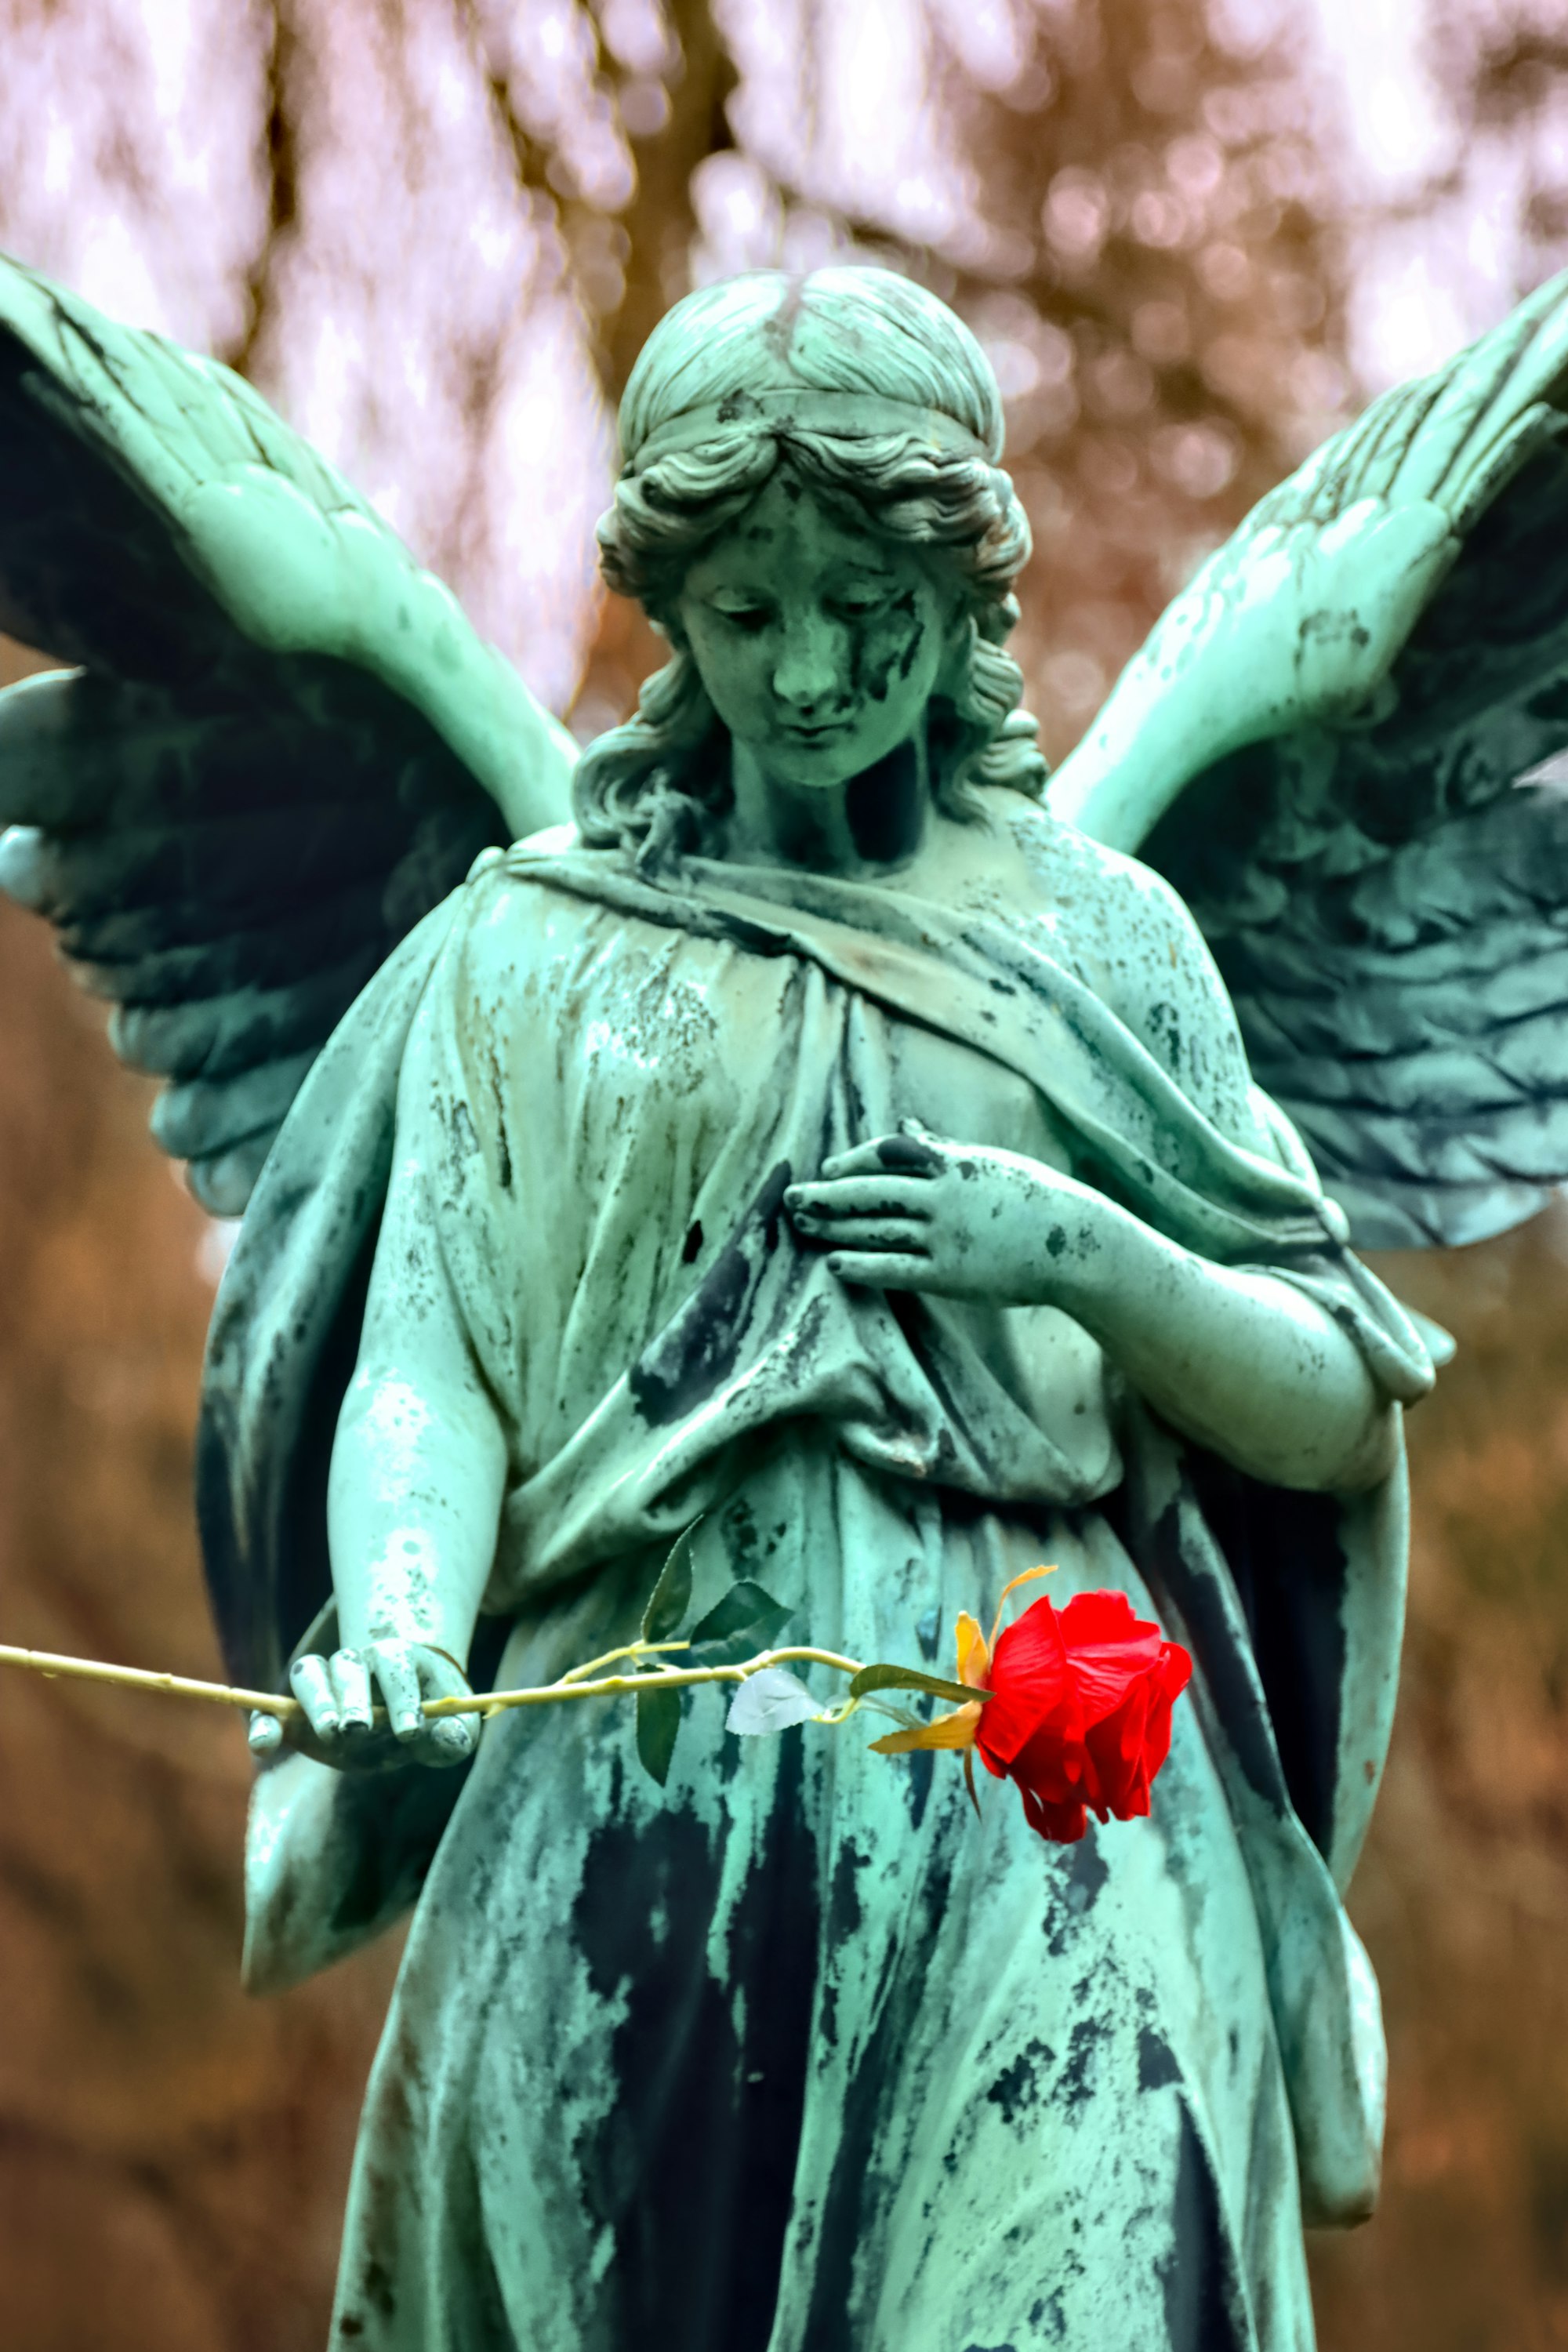 rose, red, angel, woman, beautiful, nice, lovely, Pretty, breasts, Cemetery, green, leaves, foliage, spring, graveyard, gray, grey, Hamburg, Ohlsdorf, green, Body, wings, garden, trees, head, dress, gown, death, tomb, grave, Stone